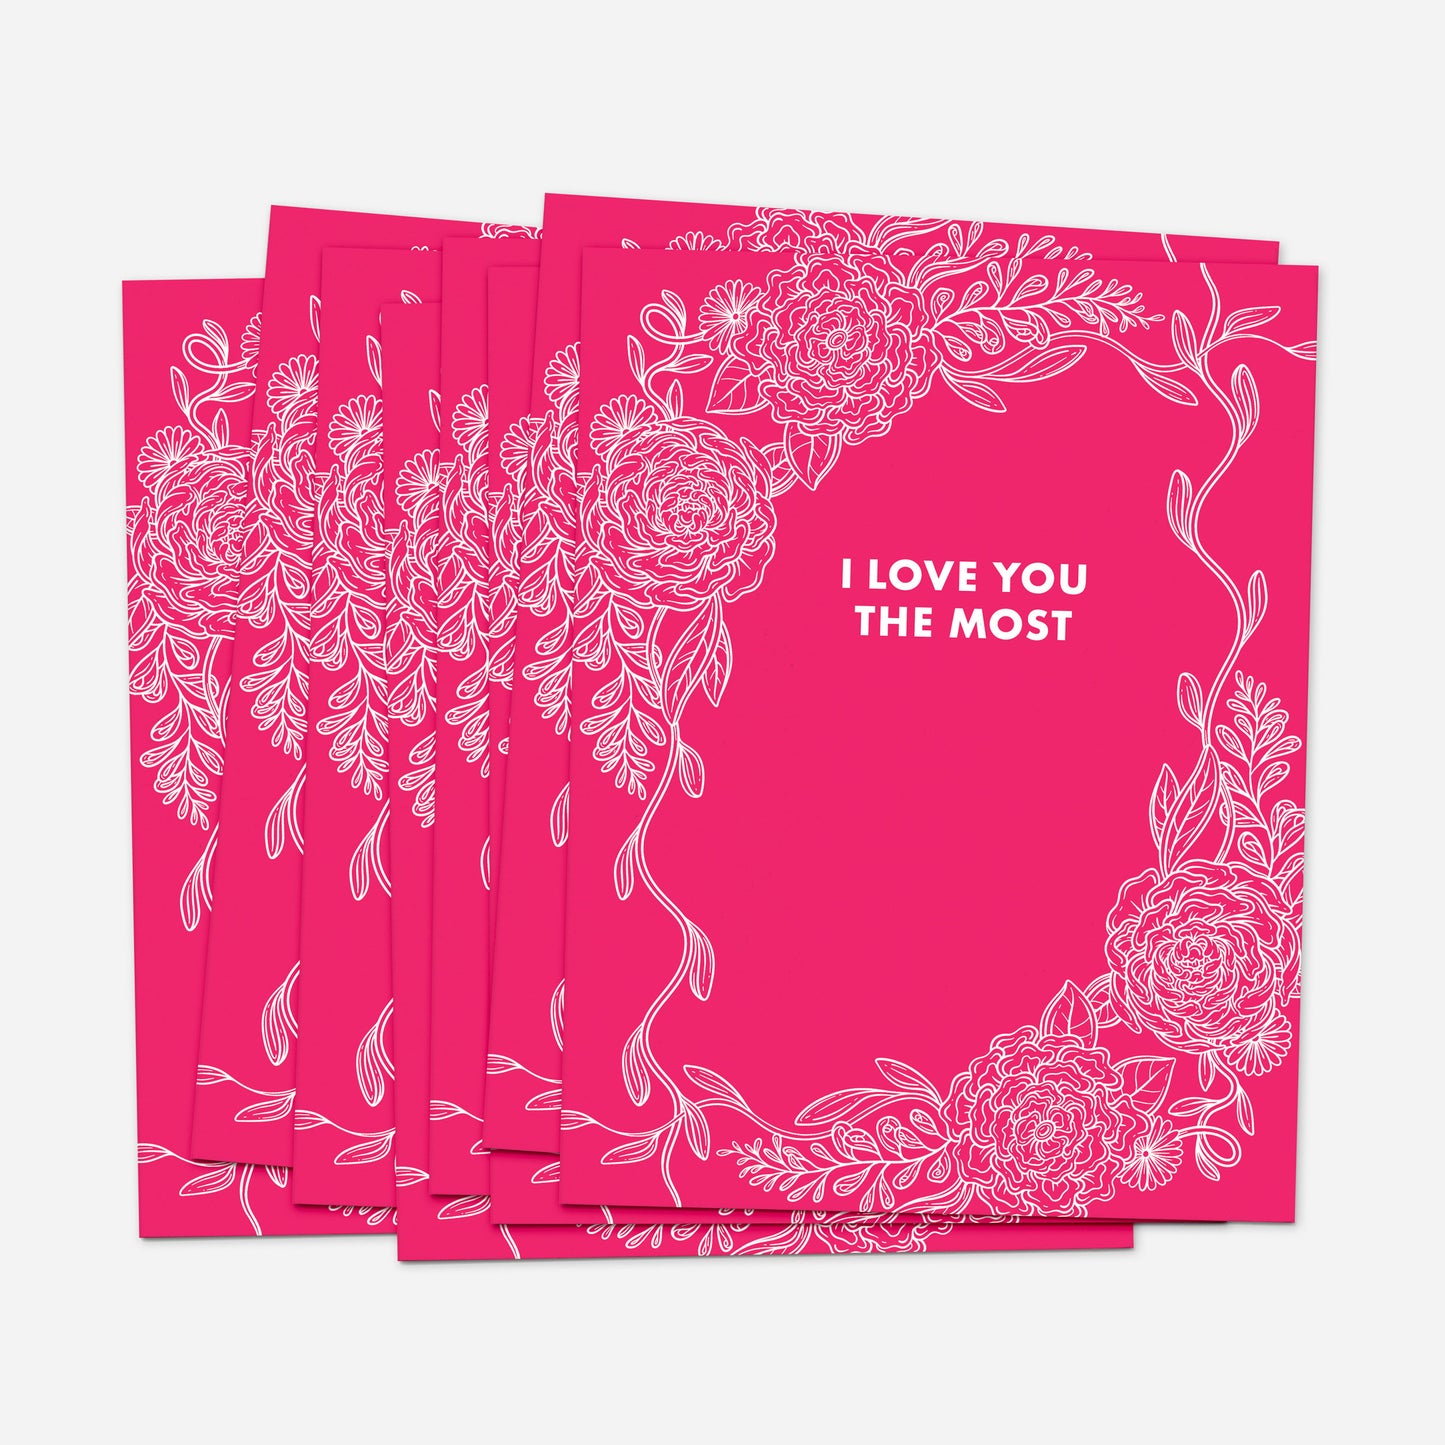 Set of 8 "I Love You The Most" Greeting Cards